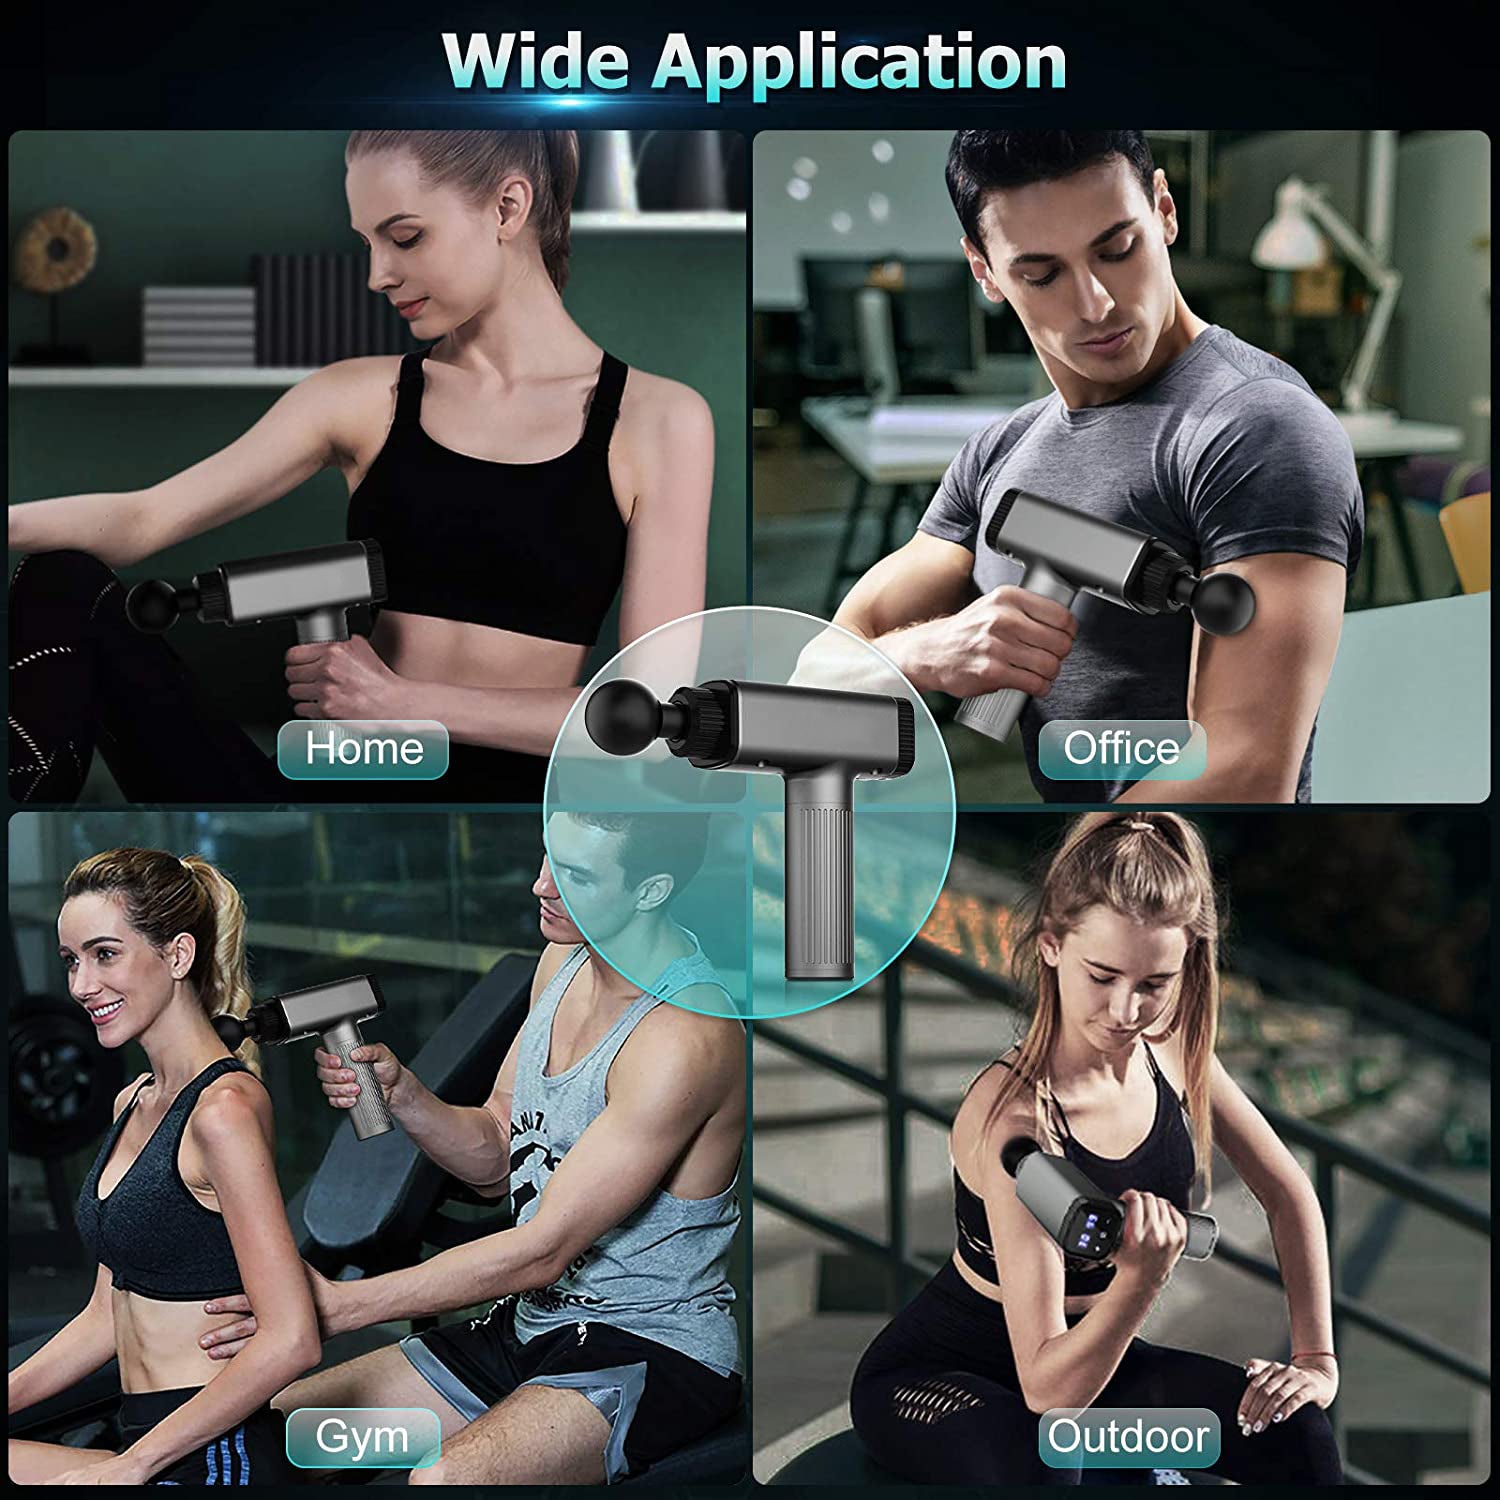 Heated Massage Percussion Gun for Athletes, Deep Tissue Muscle